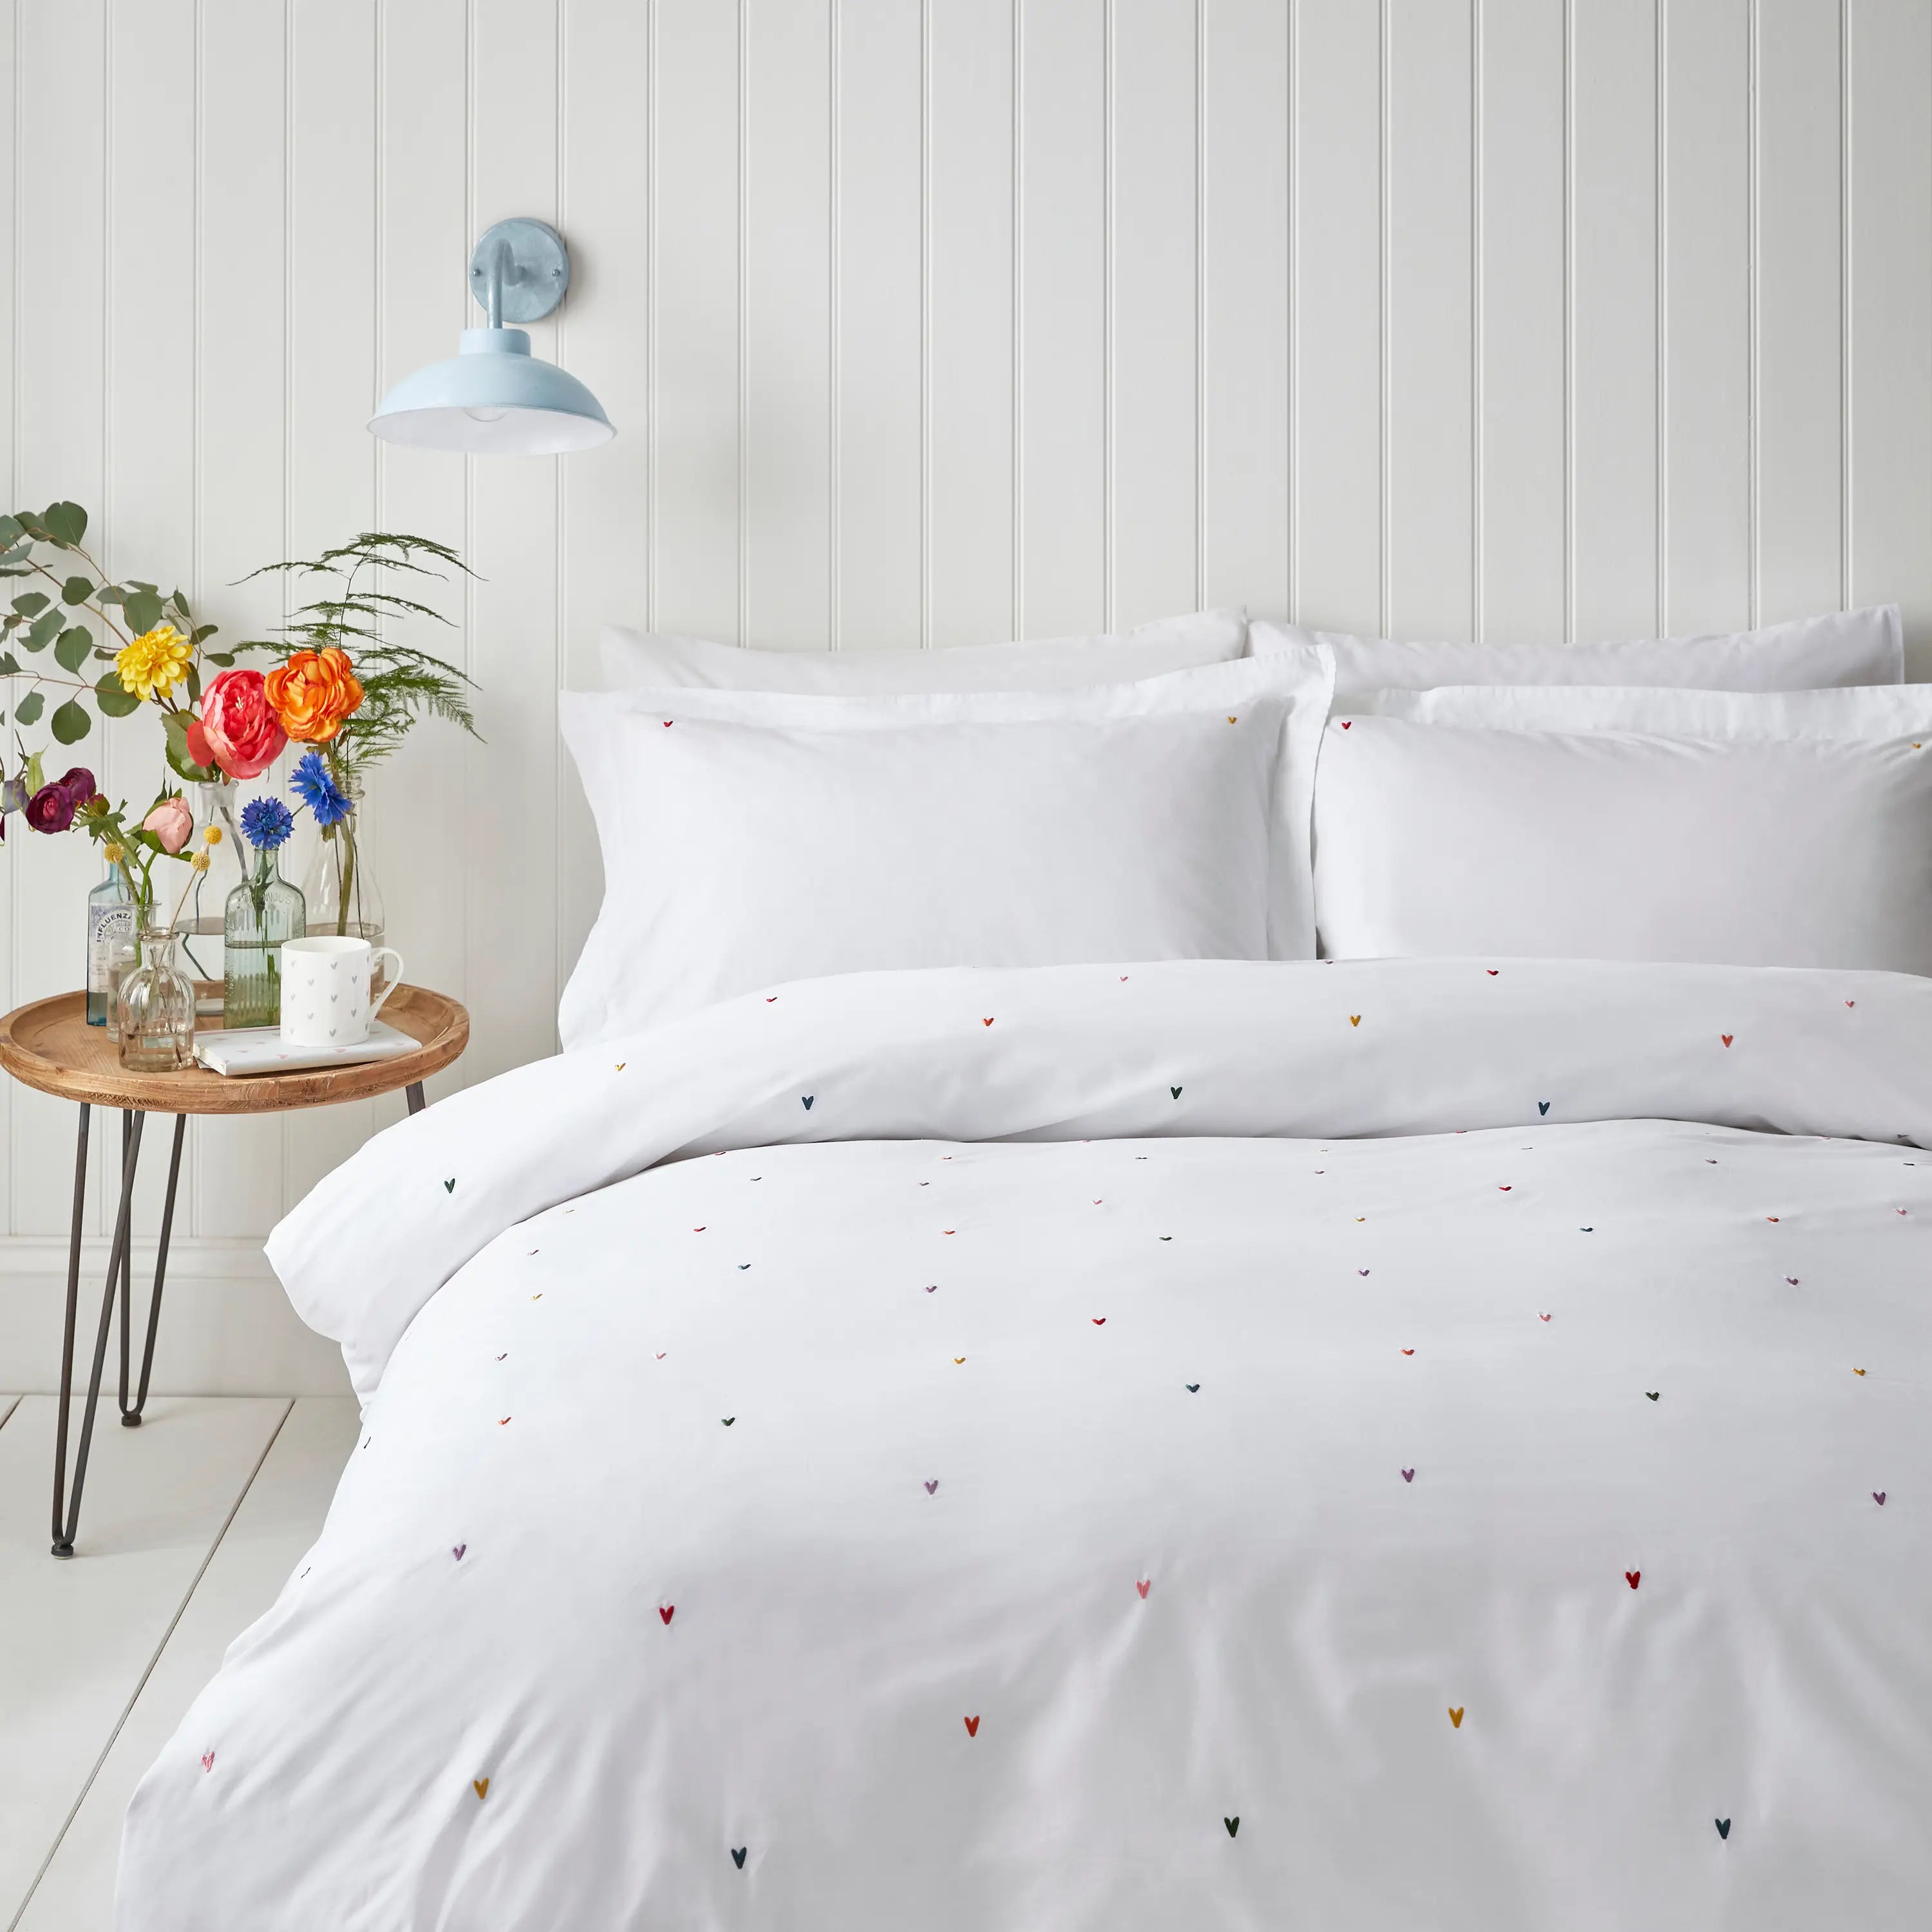 Our Guide To The Best Thread Count For Sheets